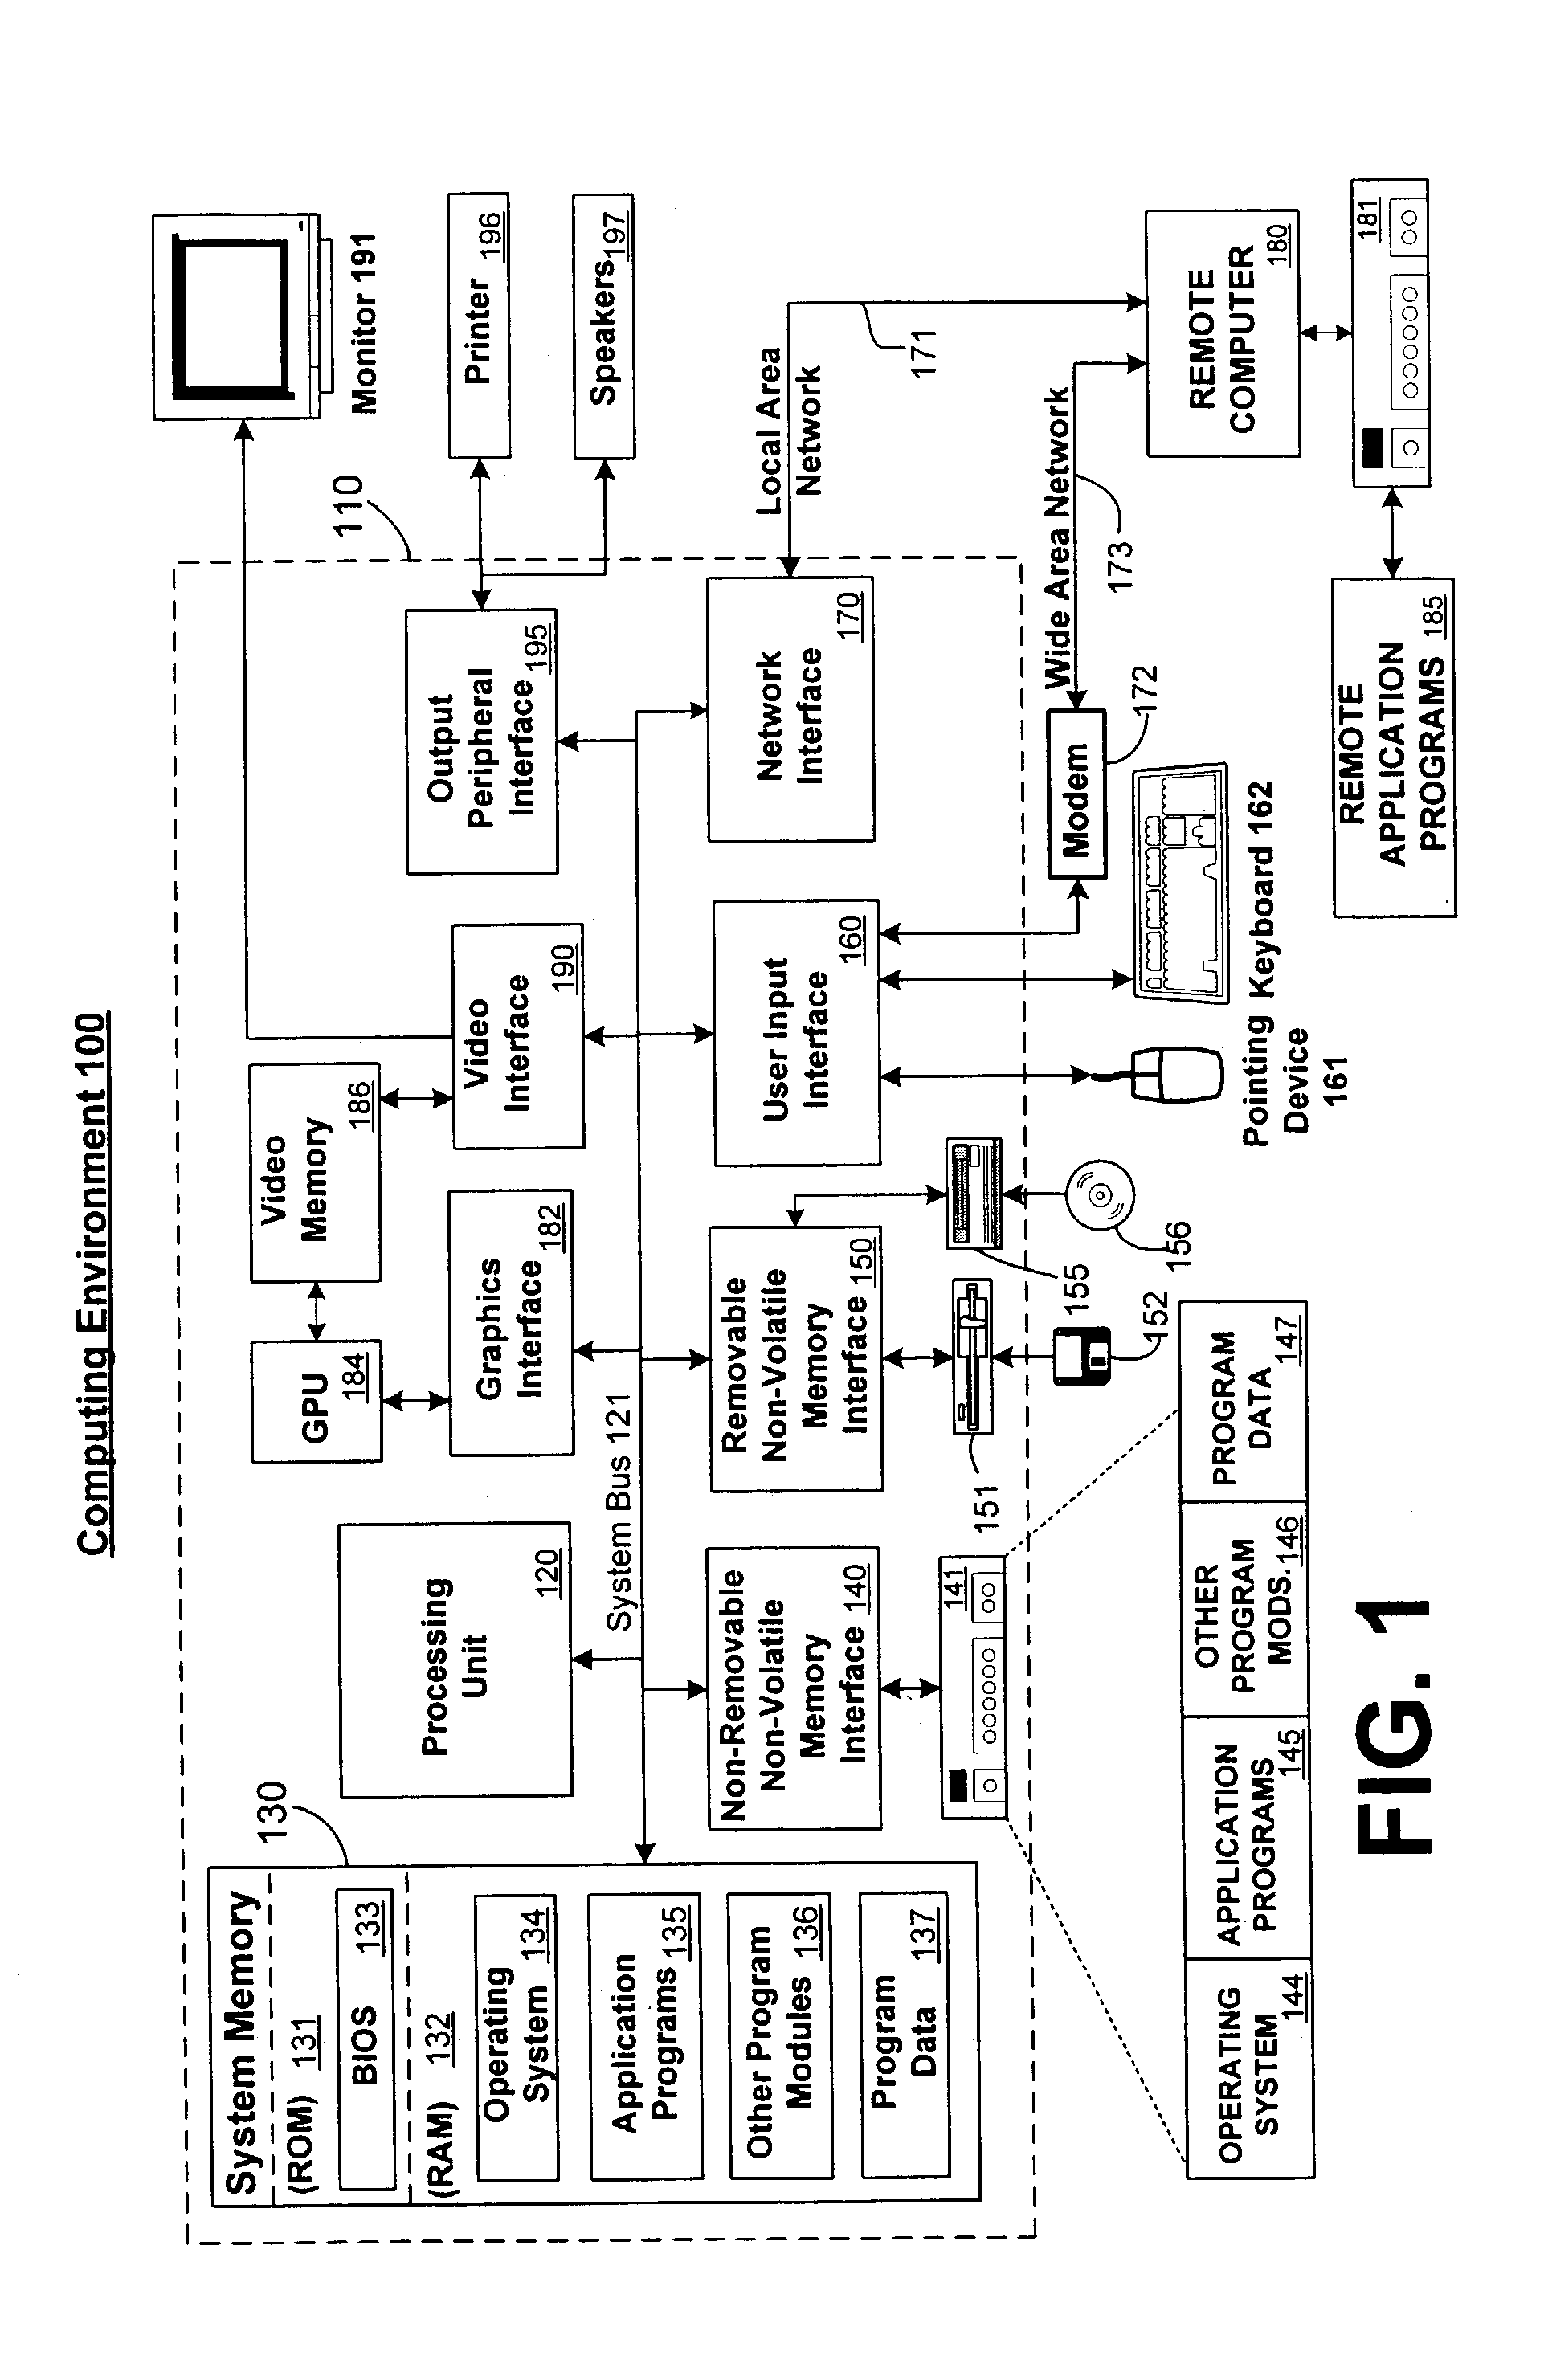 Persistent peer-to-peer networking over a piconet network